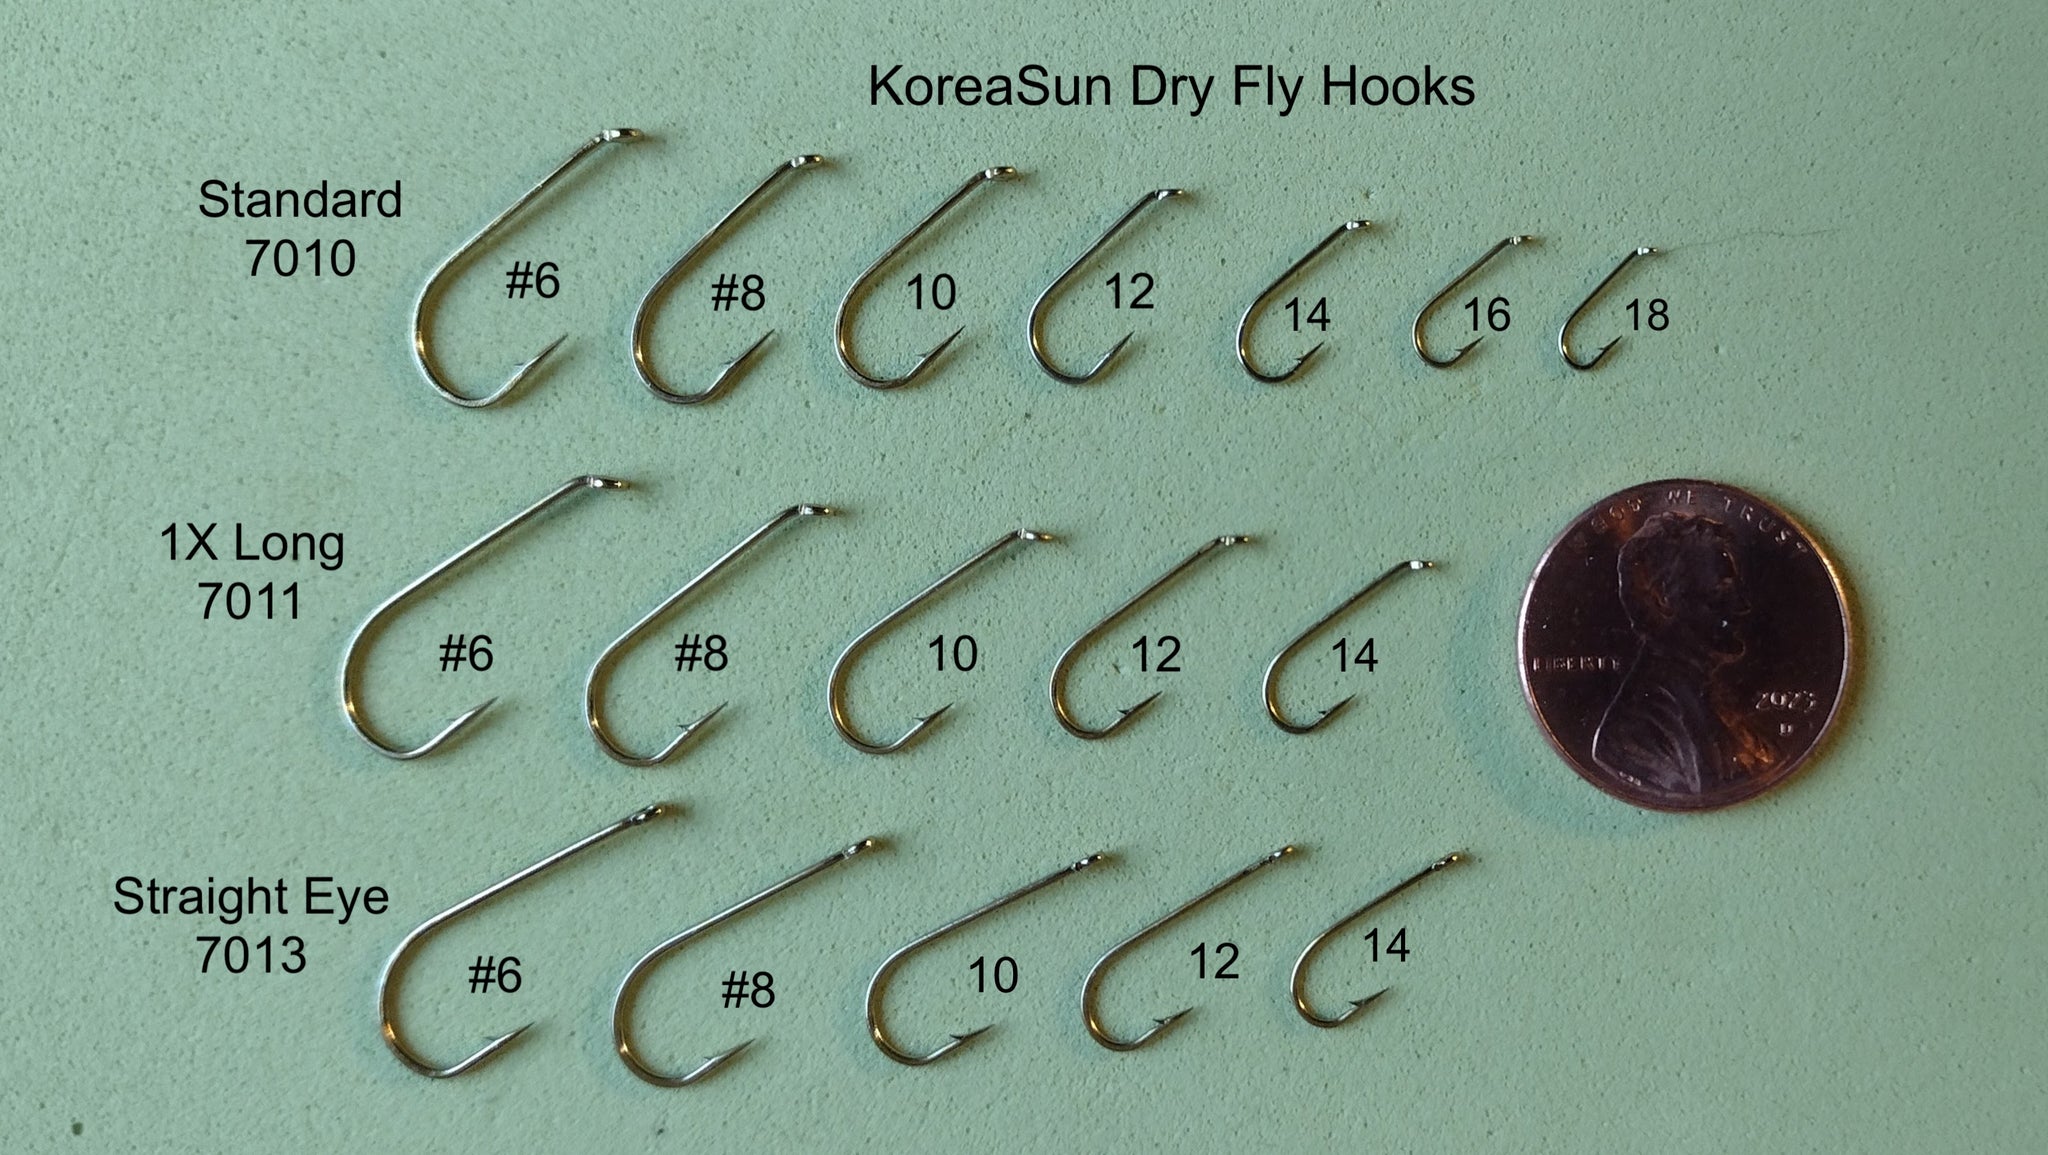 3 KoreaSun Dry Fly Hook Models Size 6 to 18